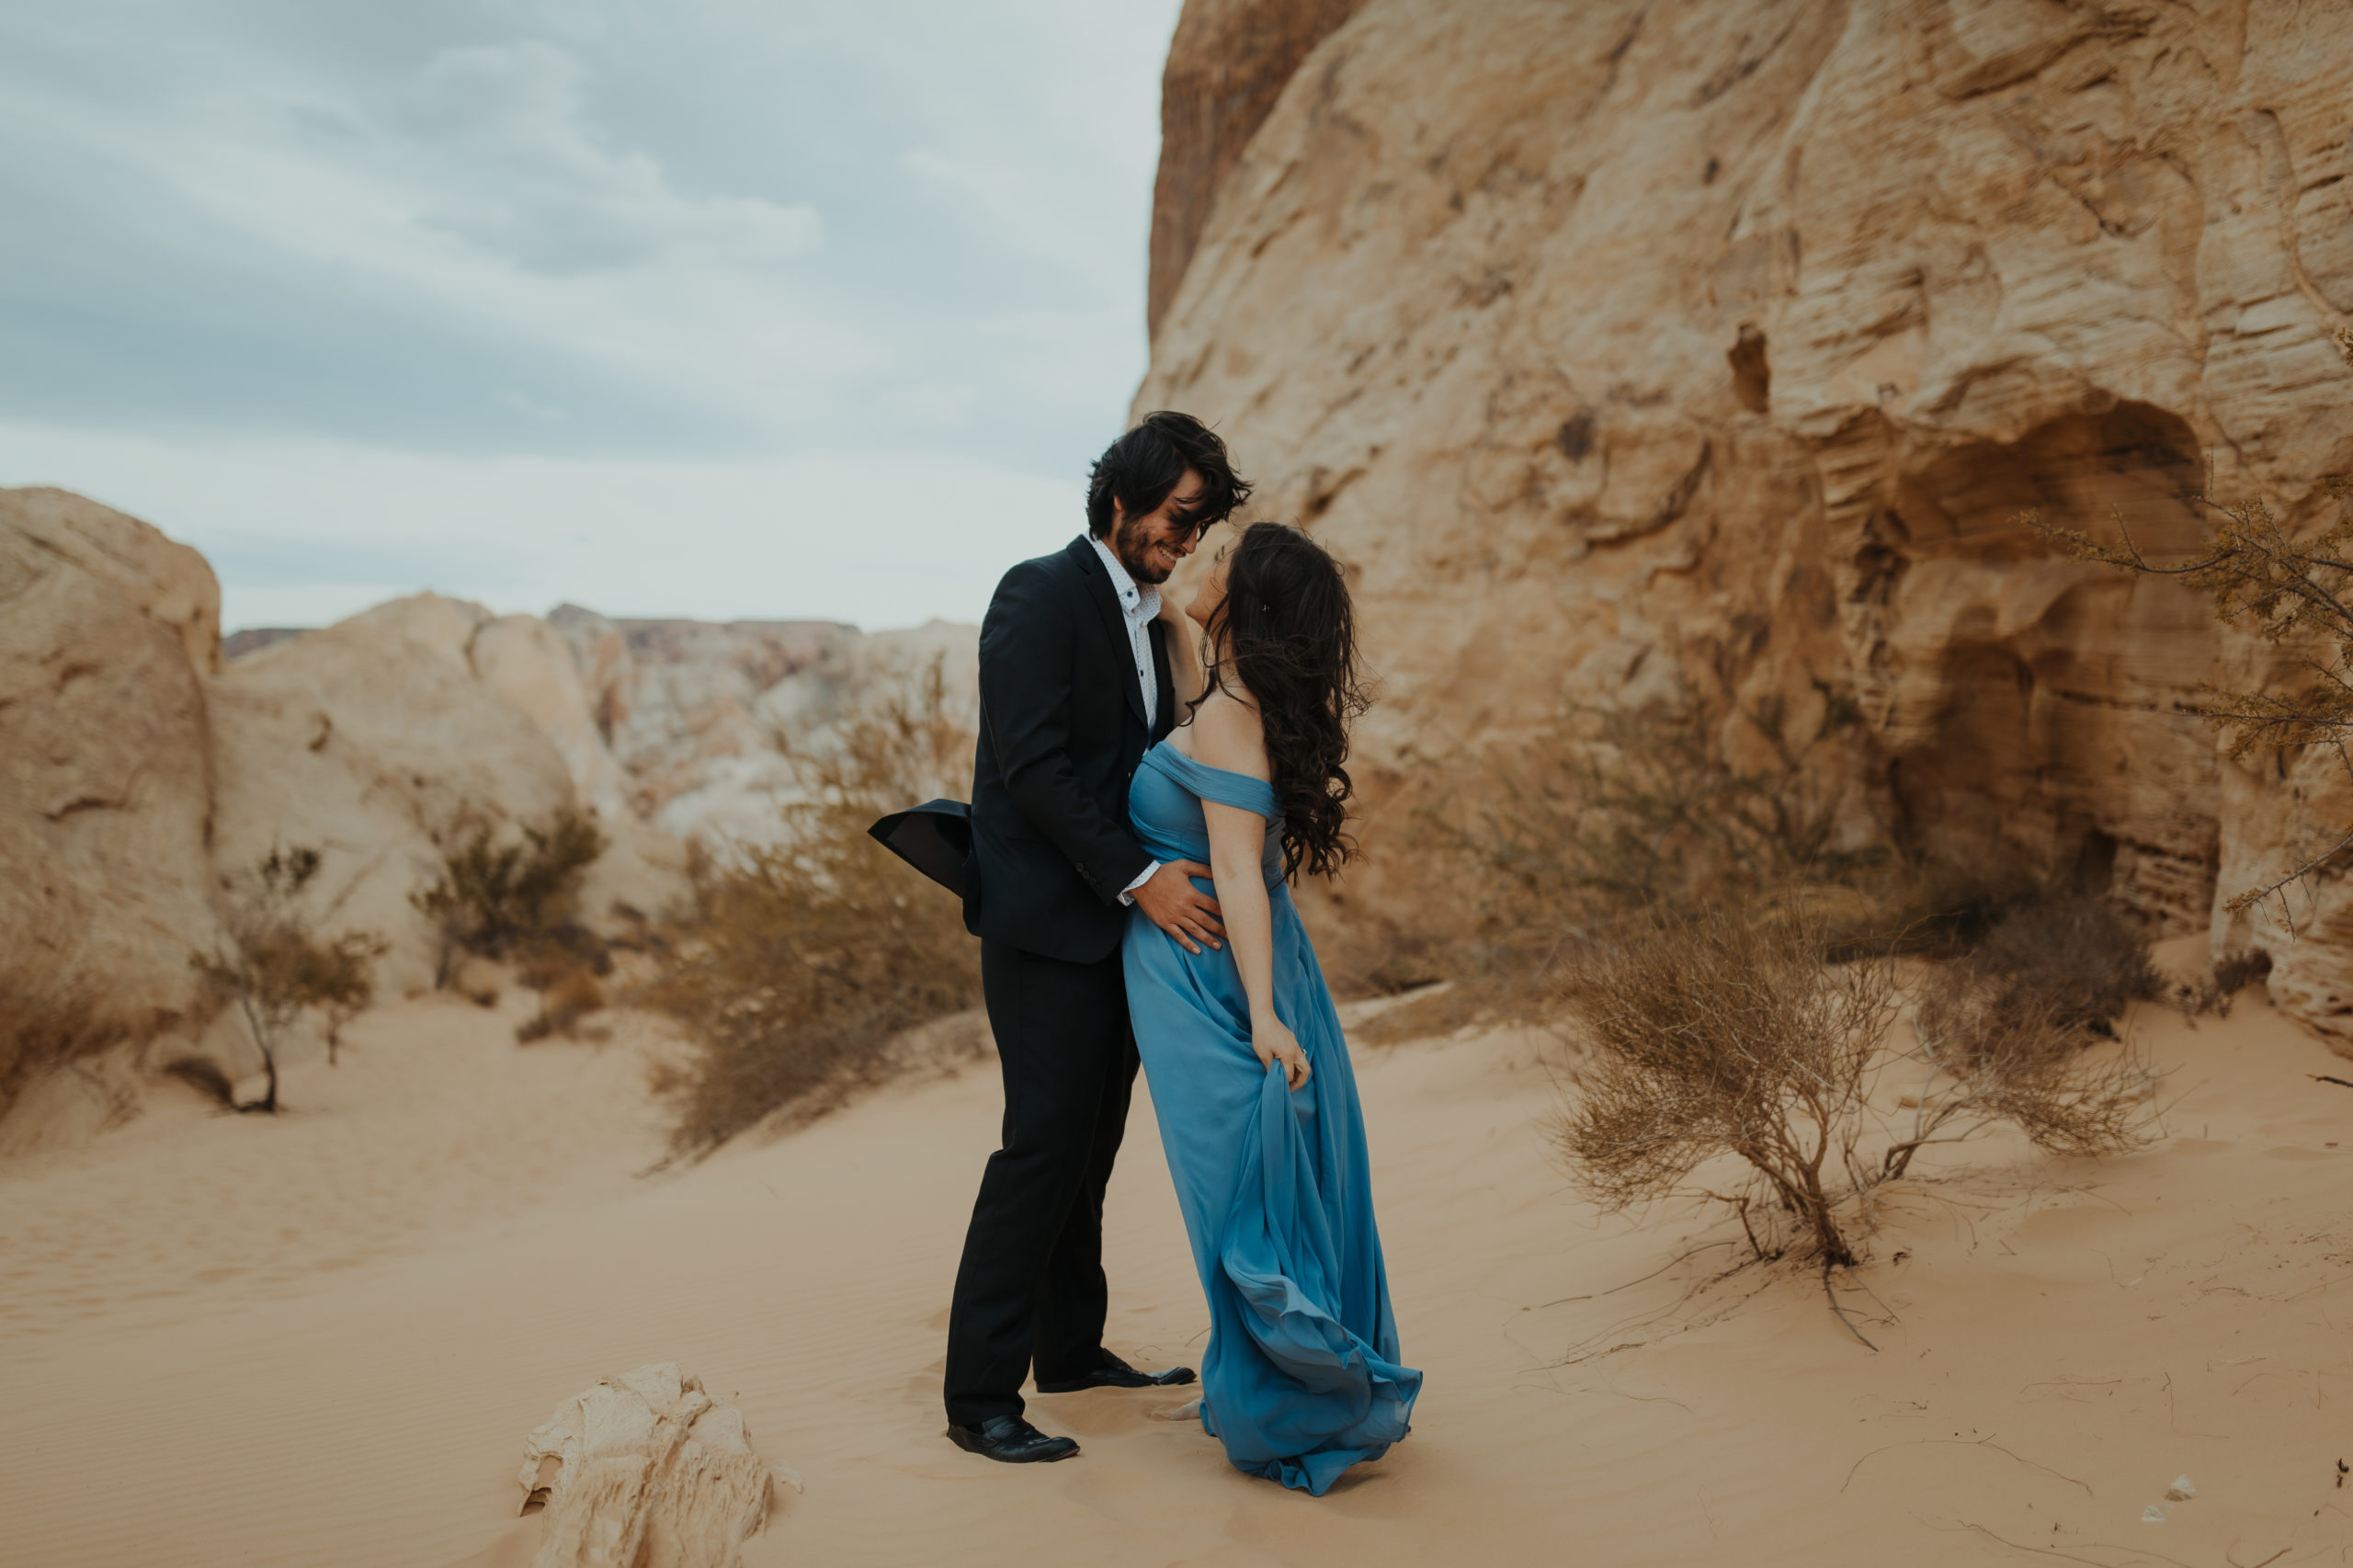 Close up of couple in desert in formal attire